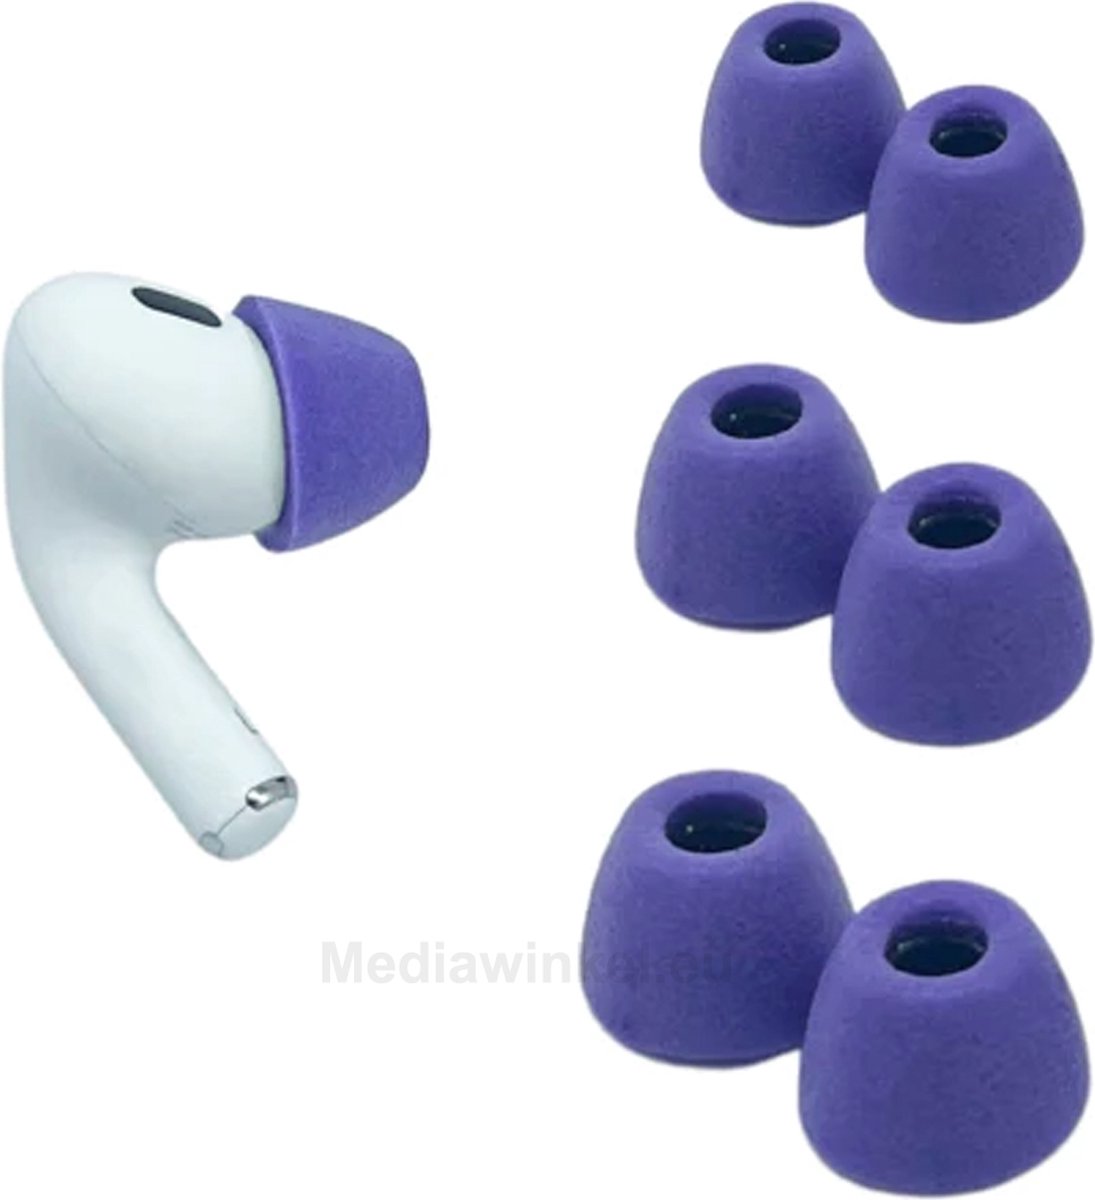 Comply Foam Tips 2.0 voor AirPods Pro, size: large, Lilac